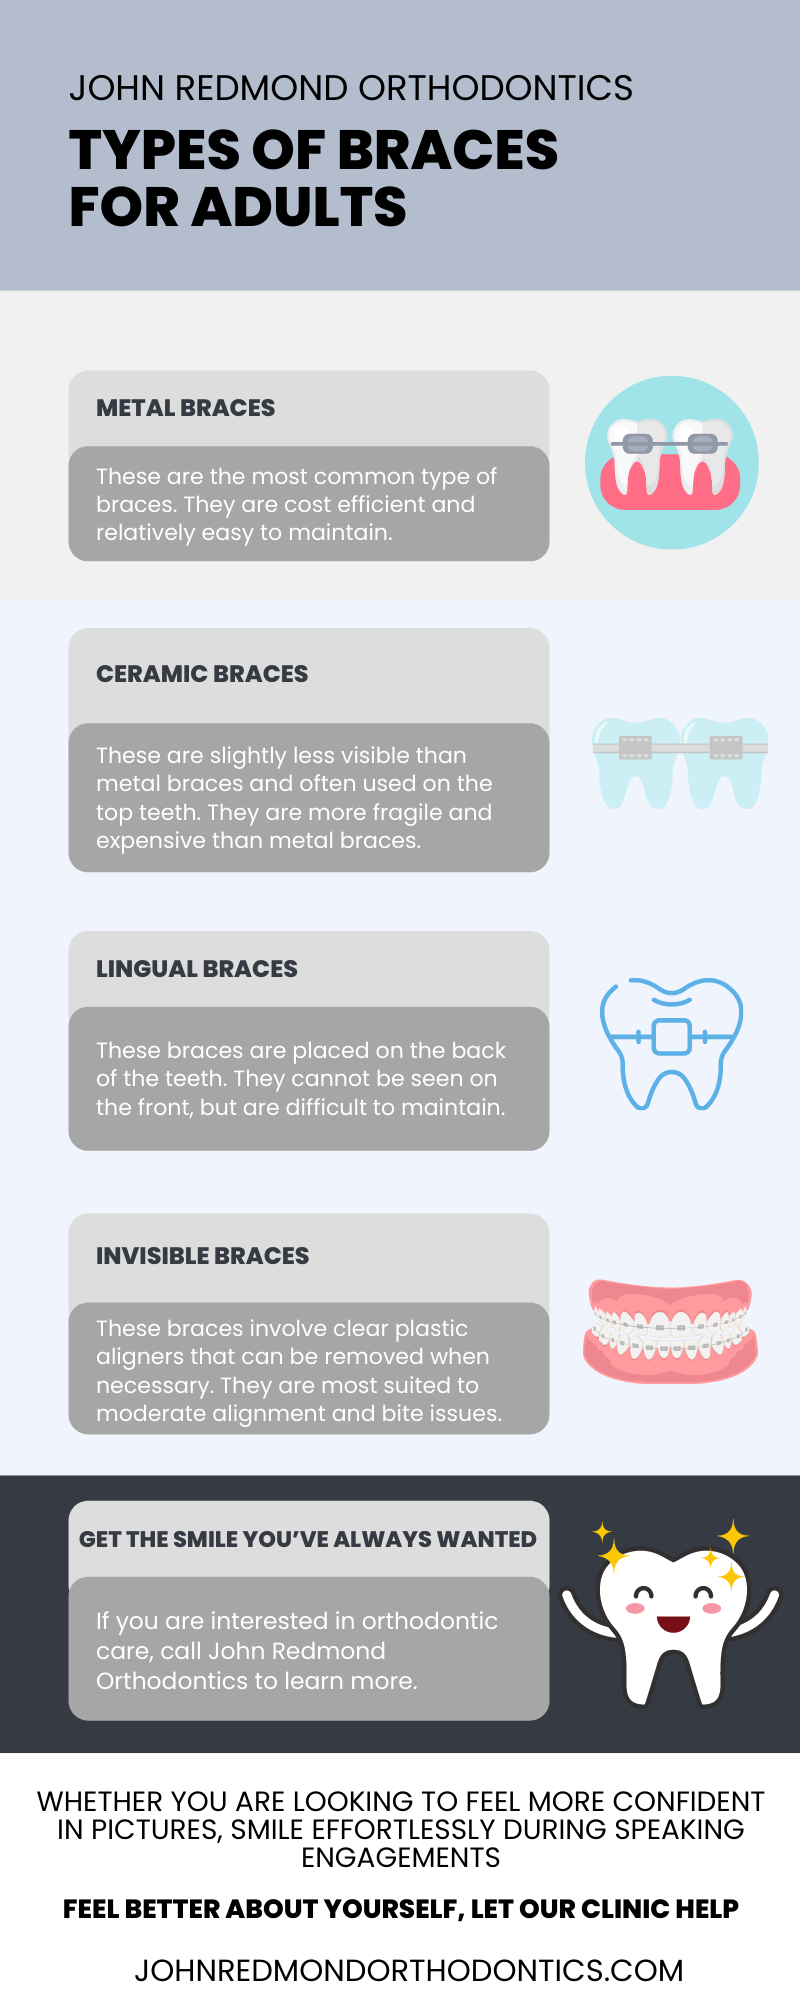 Types of orthodontics Braces for Adults Infographic